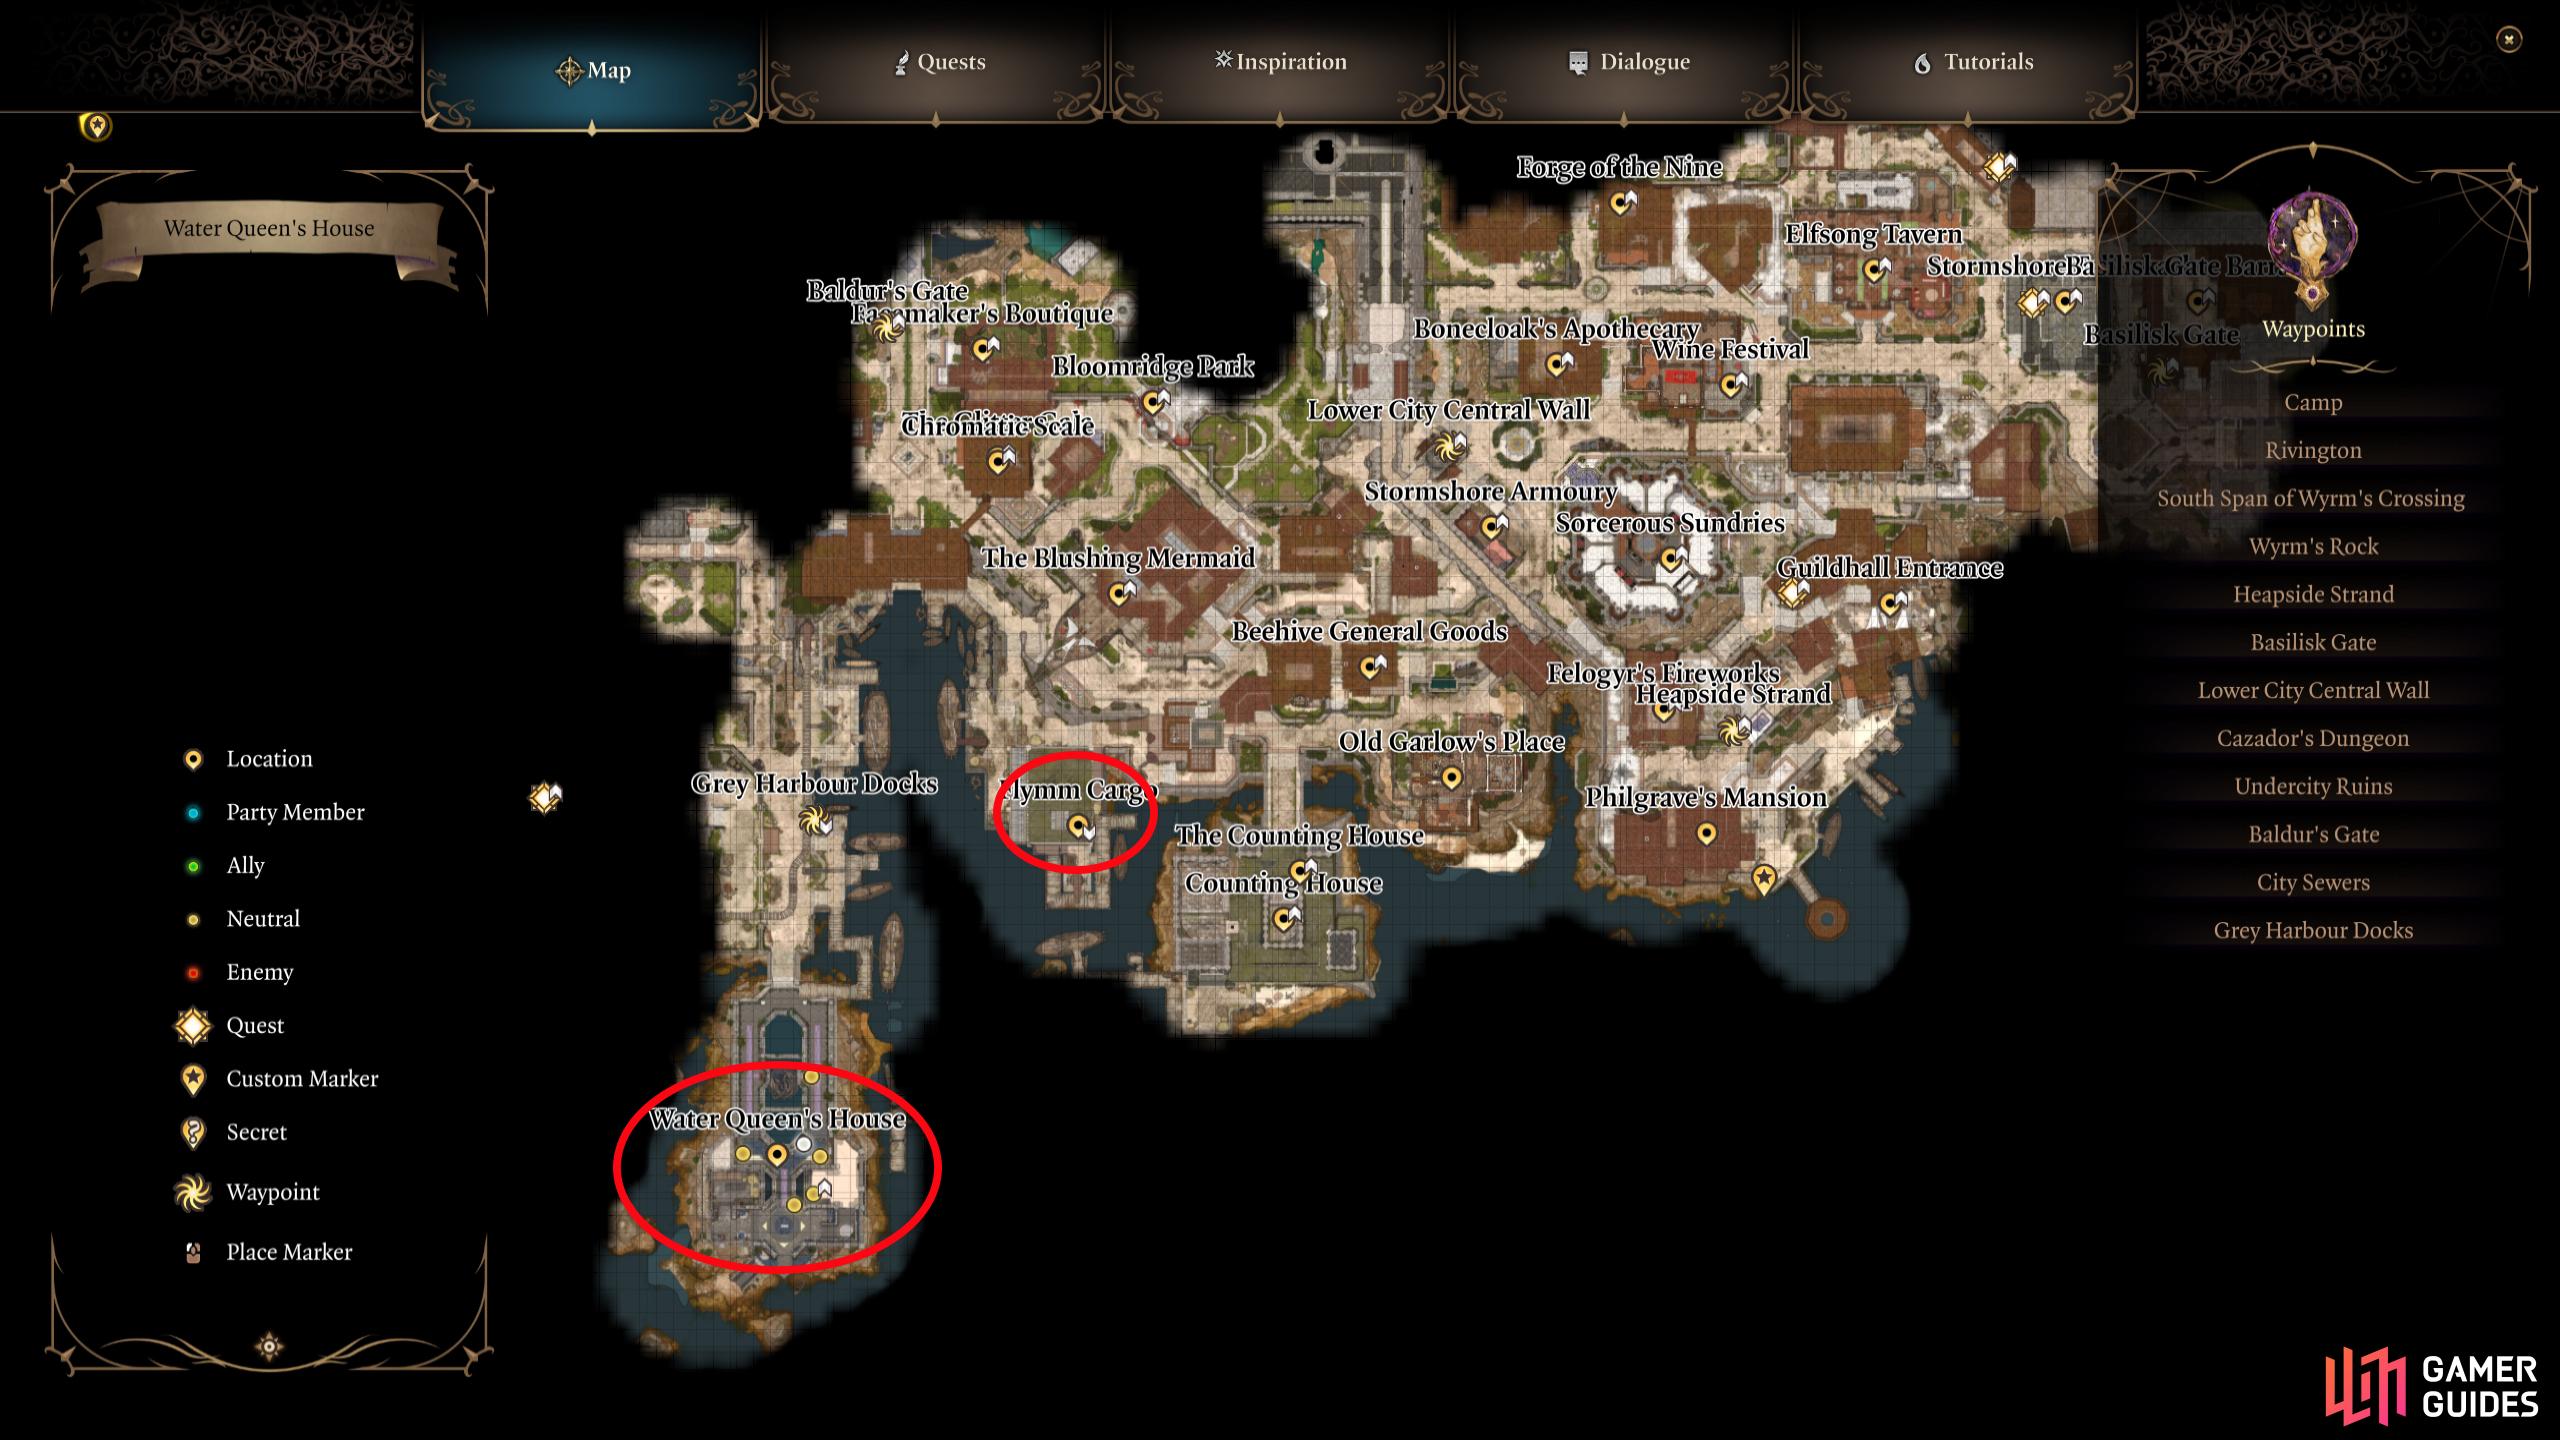 How To Complete Avenge the Drowned in Baldur's Gate 3